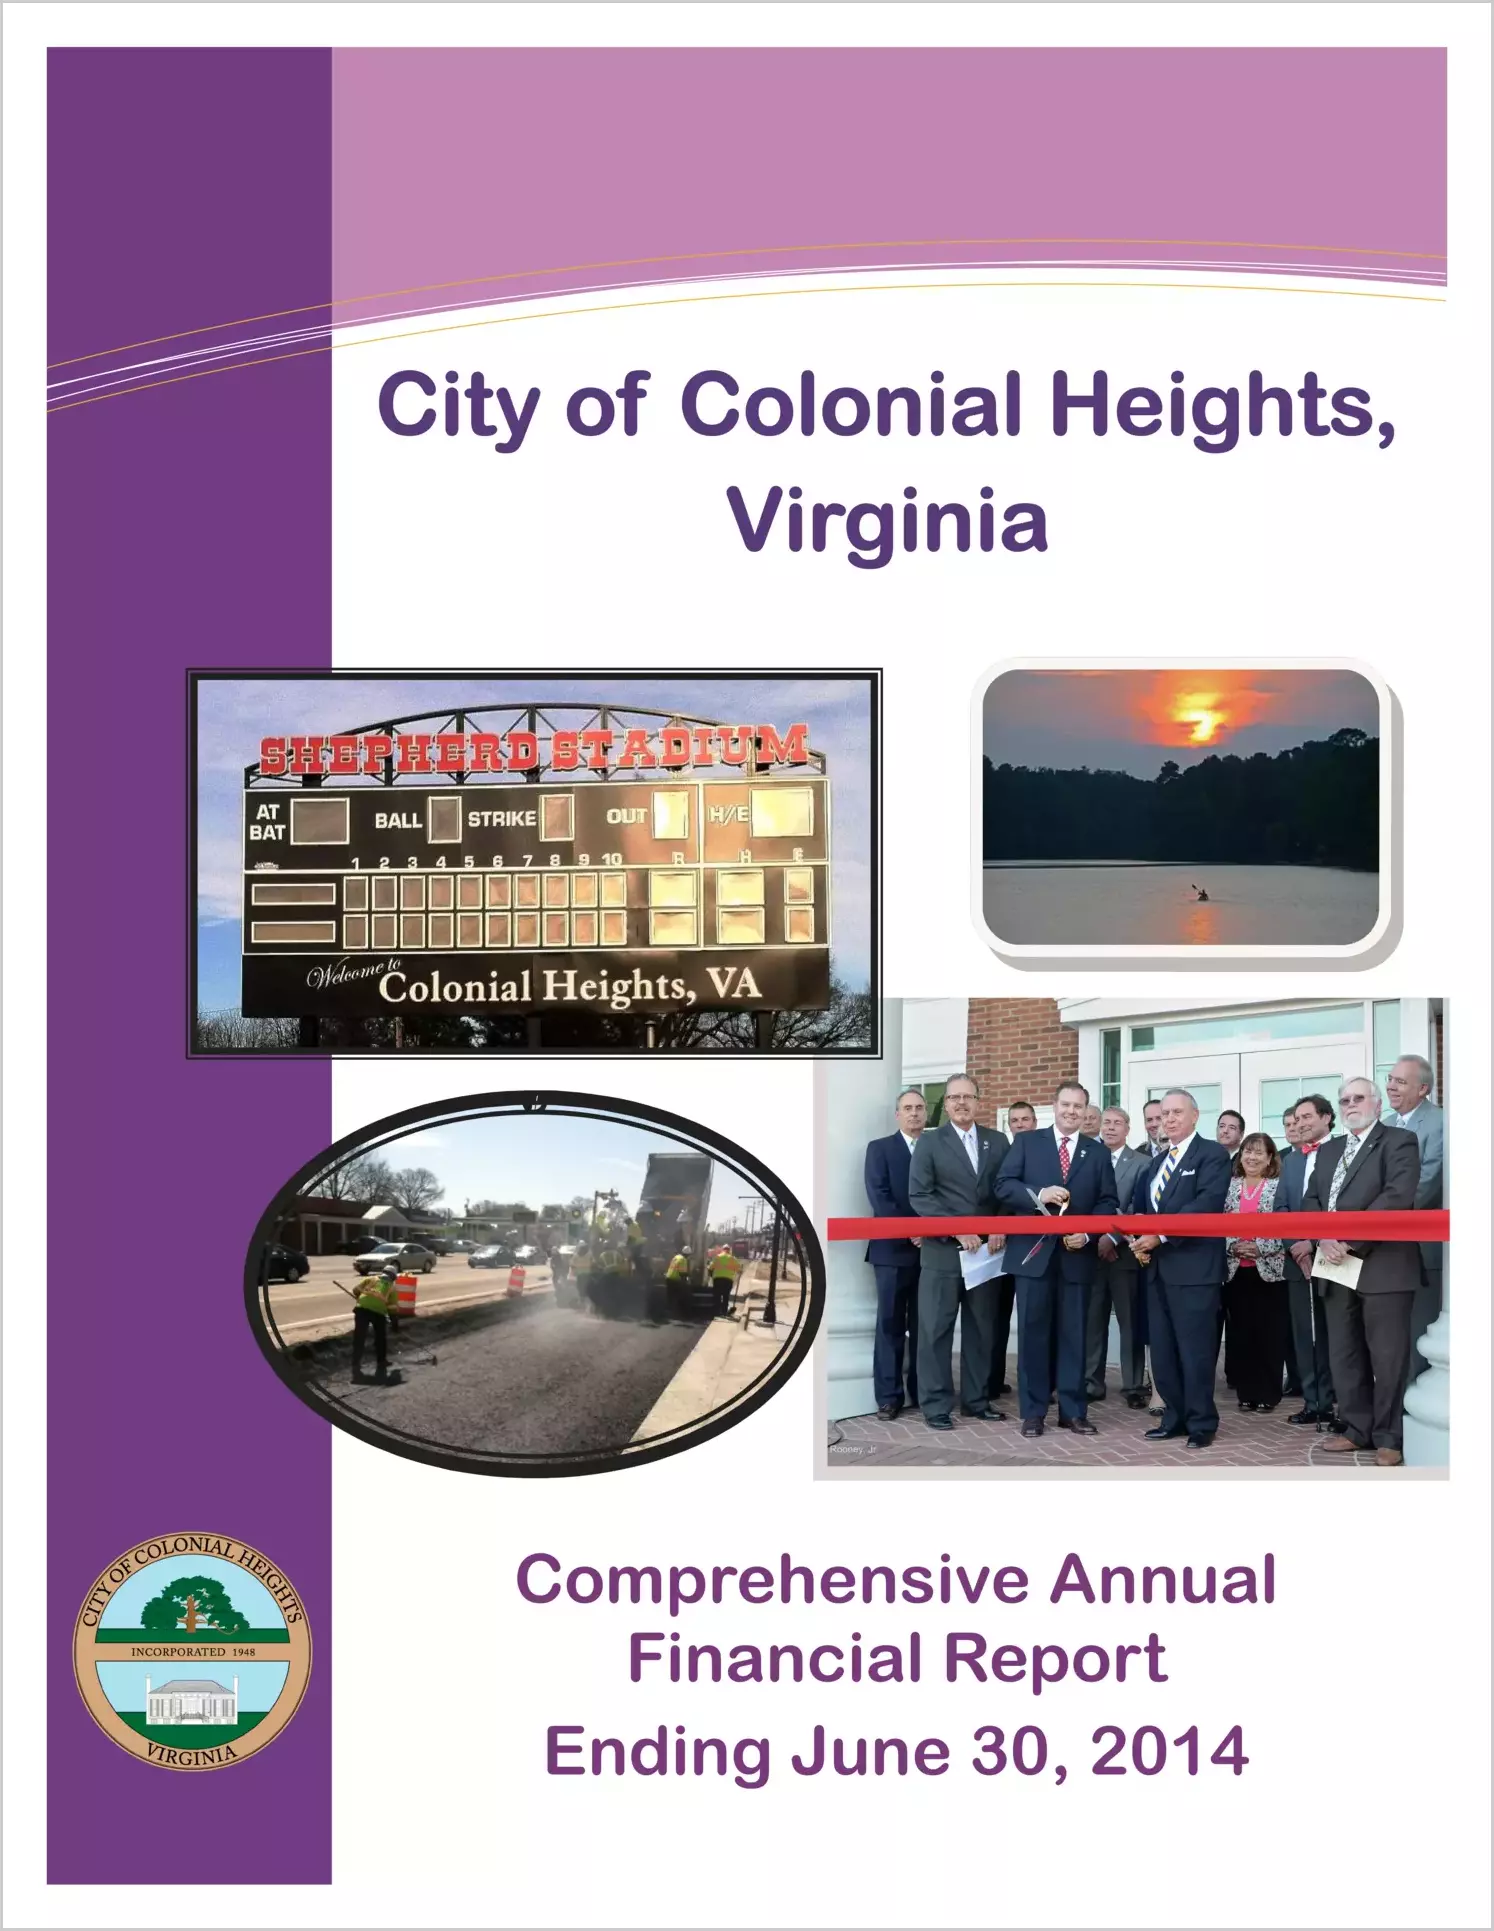 2014 Annual Financial Report for City of Colonial Heights